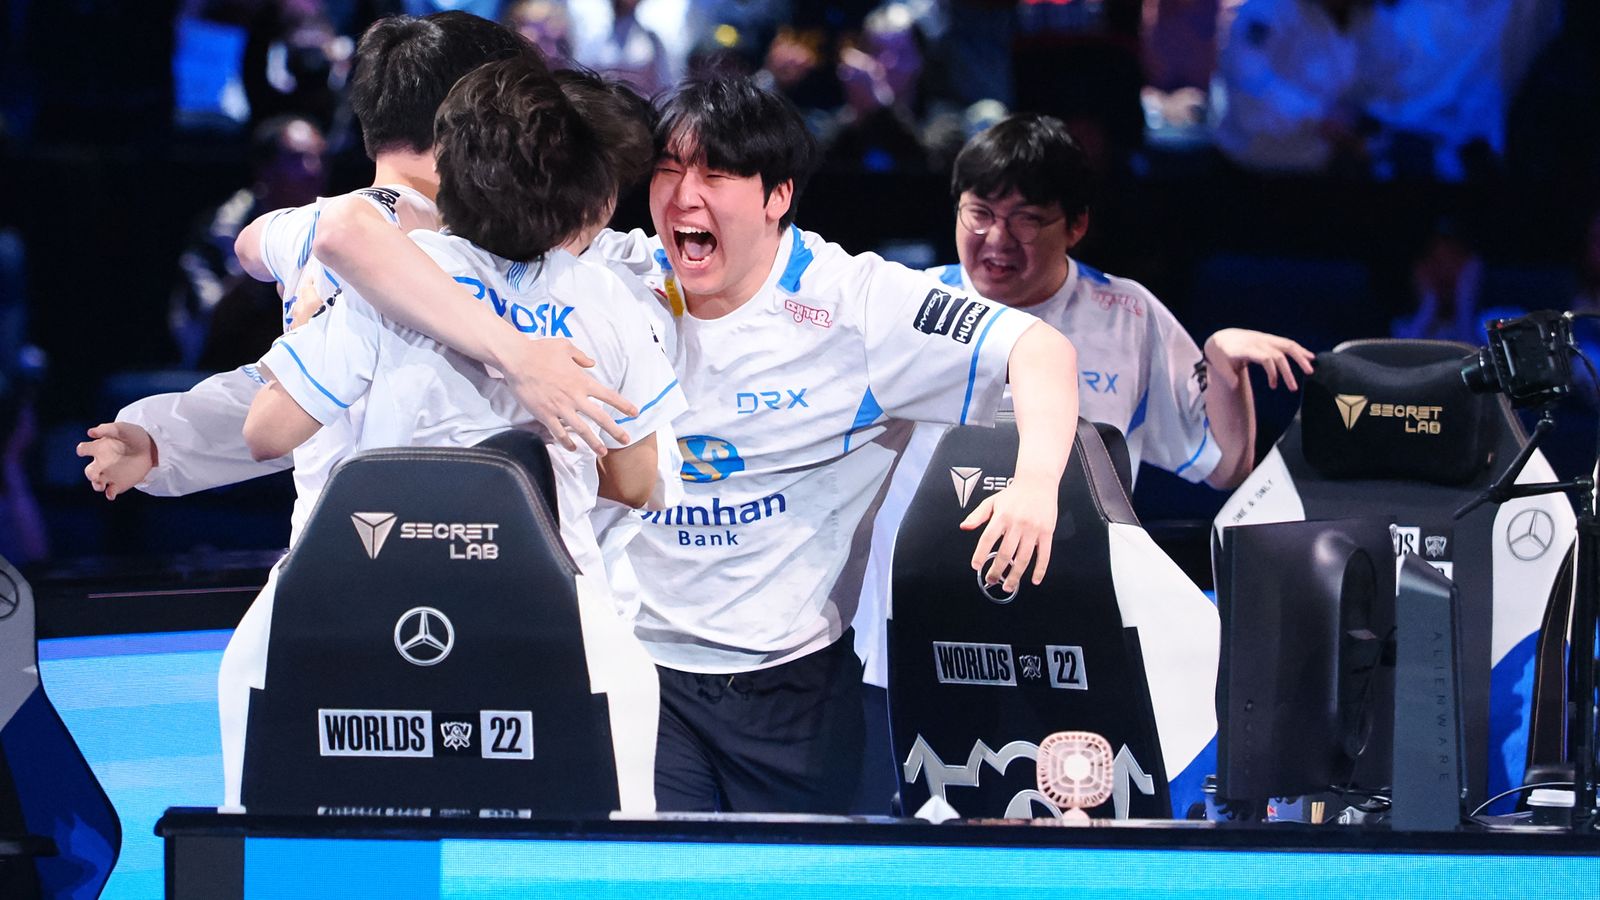 Nov 5, 2022; San Francisco, California, USA; DRX mid laner Kim "Zeka" Geon-woo joins teammates in celebration after winning the League of Legends World Championships against T1 at Chase Center. Mandatory Credit: Kelley L Cox-USA TODAY Sports